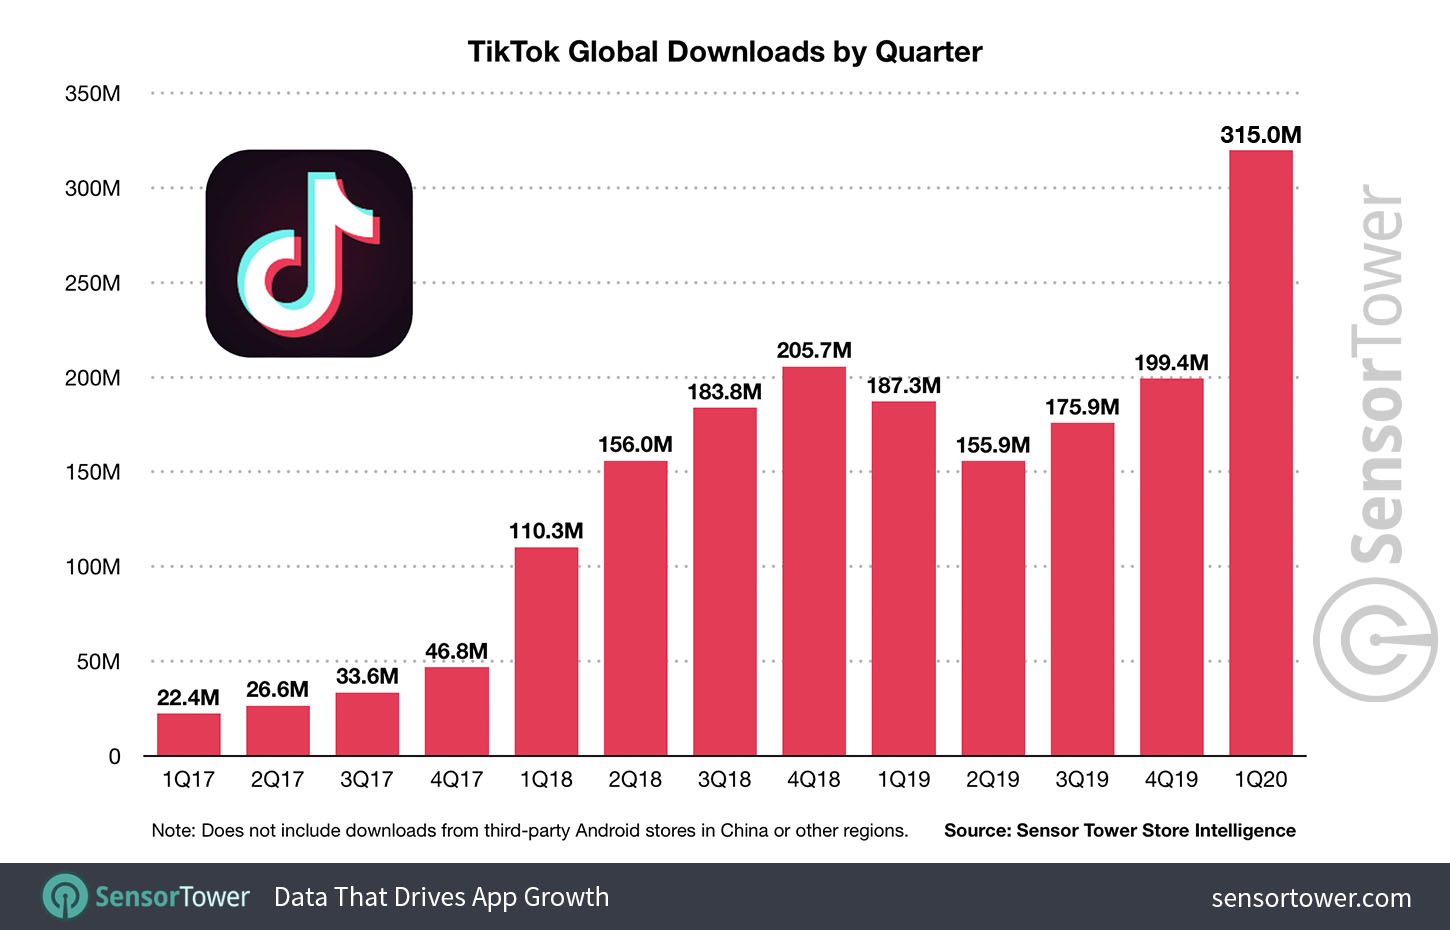 Future of TV Briefing TikTok’s revenuesharing terms are turning off